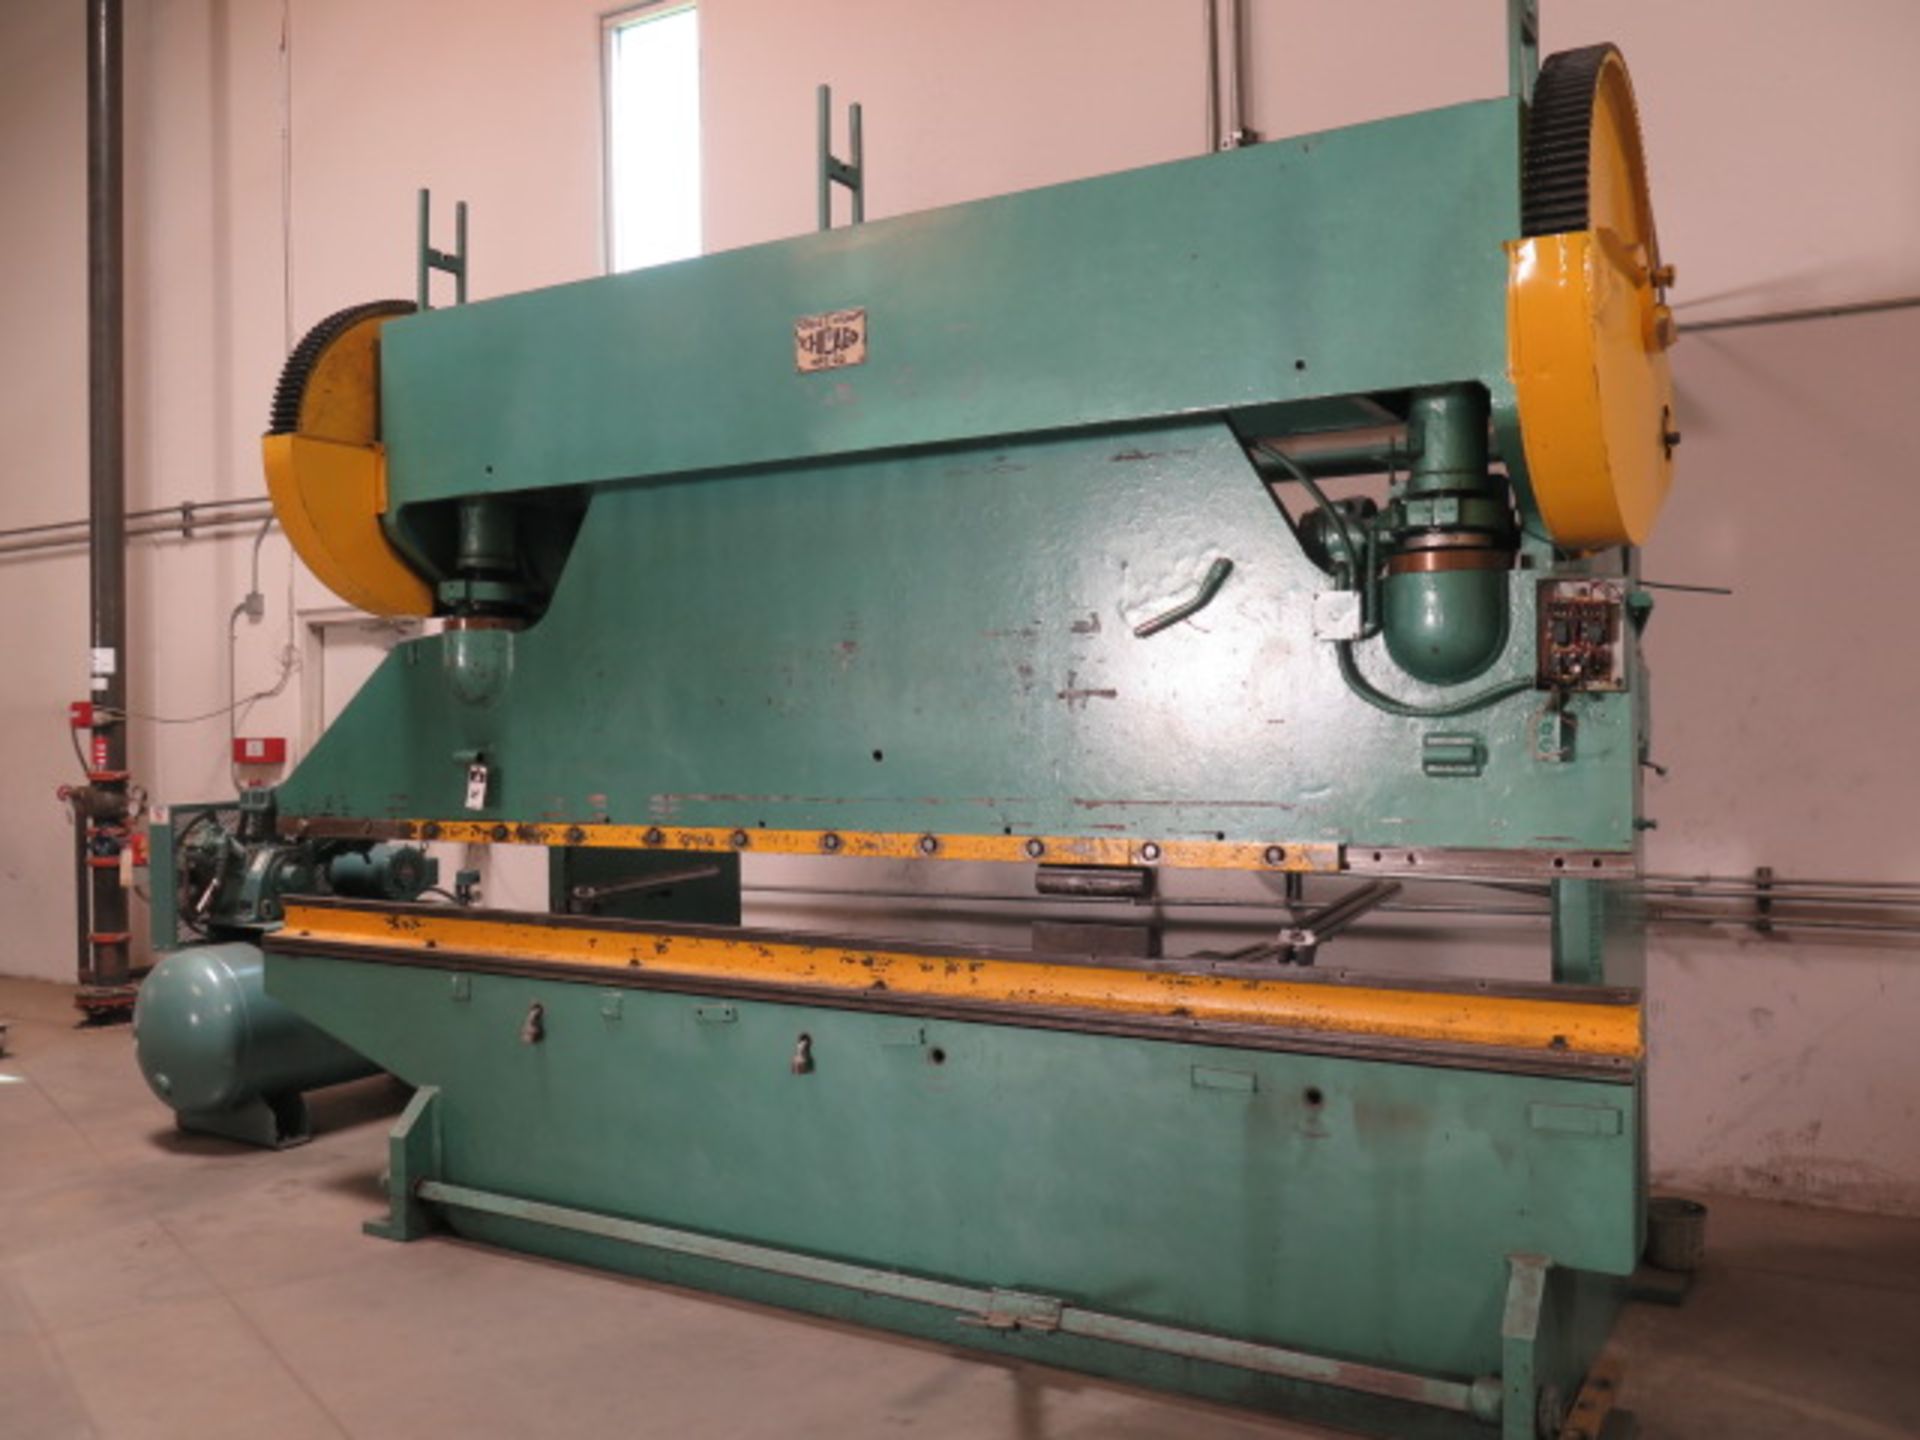 Chicago 180-Ton x 14’ Press Brake s/n 6798 w/ Manual Back Gage, 124” Between Uprights, 18” Throat - Image 2 of 9